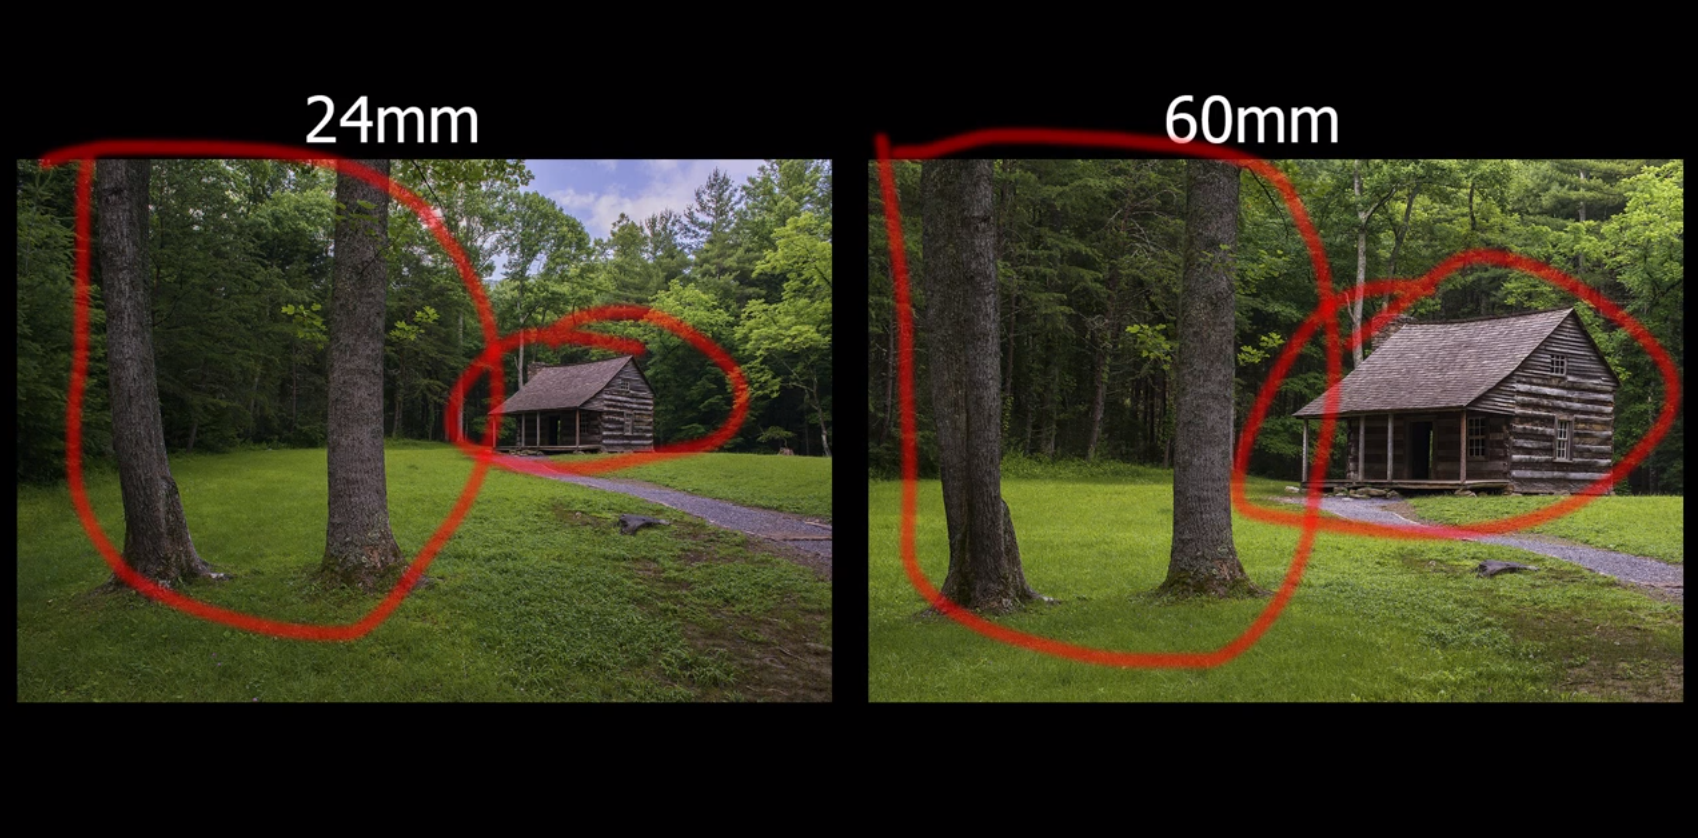 Tutorial: How to Pick the Best Focal Length When Capturing Landscapes